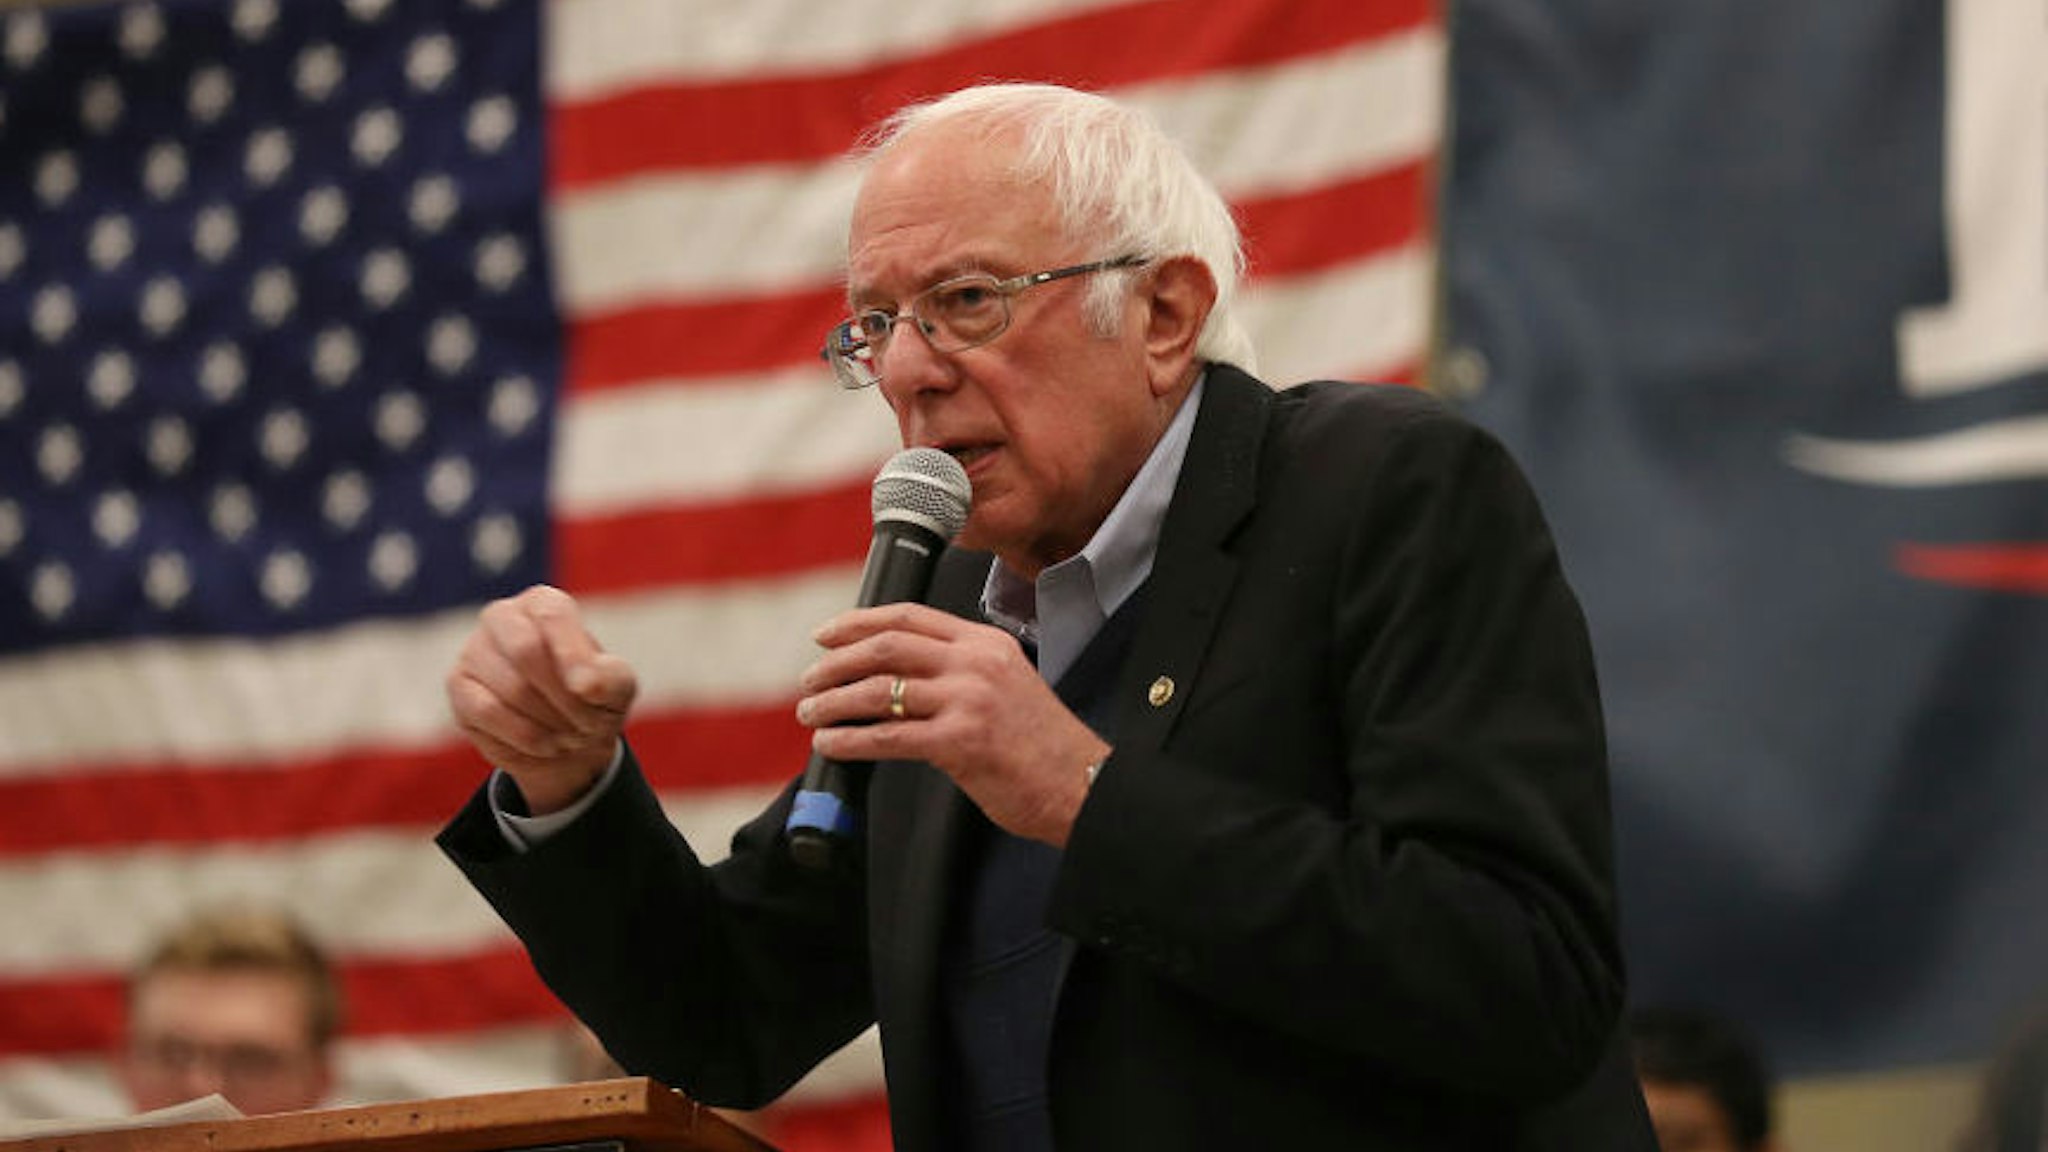 WINTERSET, IOWA - DECEMBER 30: Democratic presidential candidate Sen. Bernie Sanders (D-VT) speaks during a campaign event at Winterset Middle School Commons on December 30, 2019 in Winterset, Iowa. The 2020 Iowa Democratic caucuses will take place on February 3, 2020, making it the first nominating contest for the Democratic Party in choosing their presidential candidate to face Donald Trump in the 2020 election.